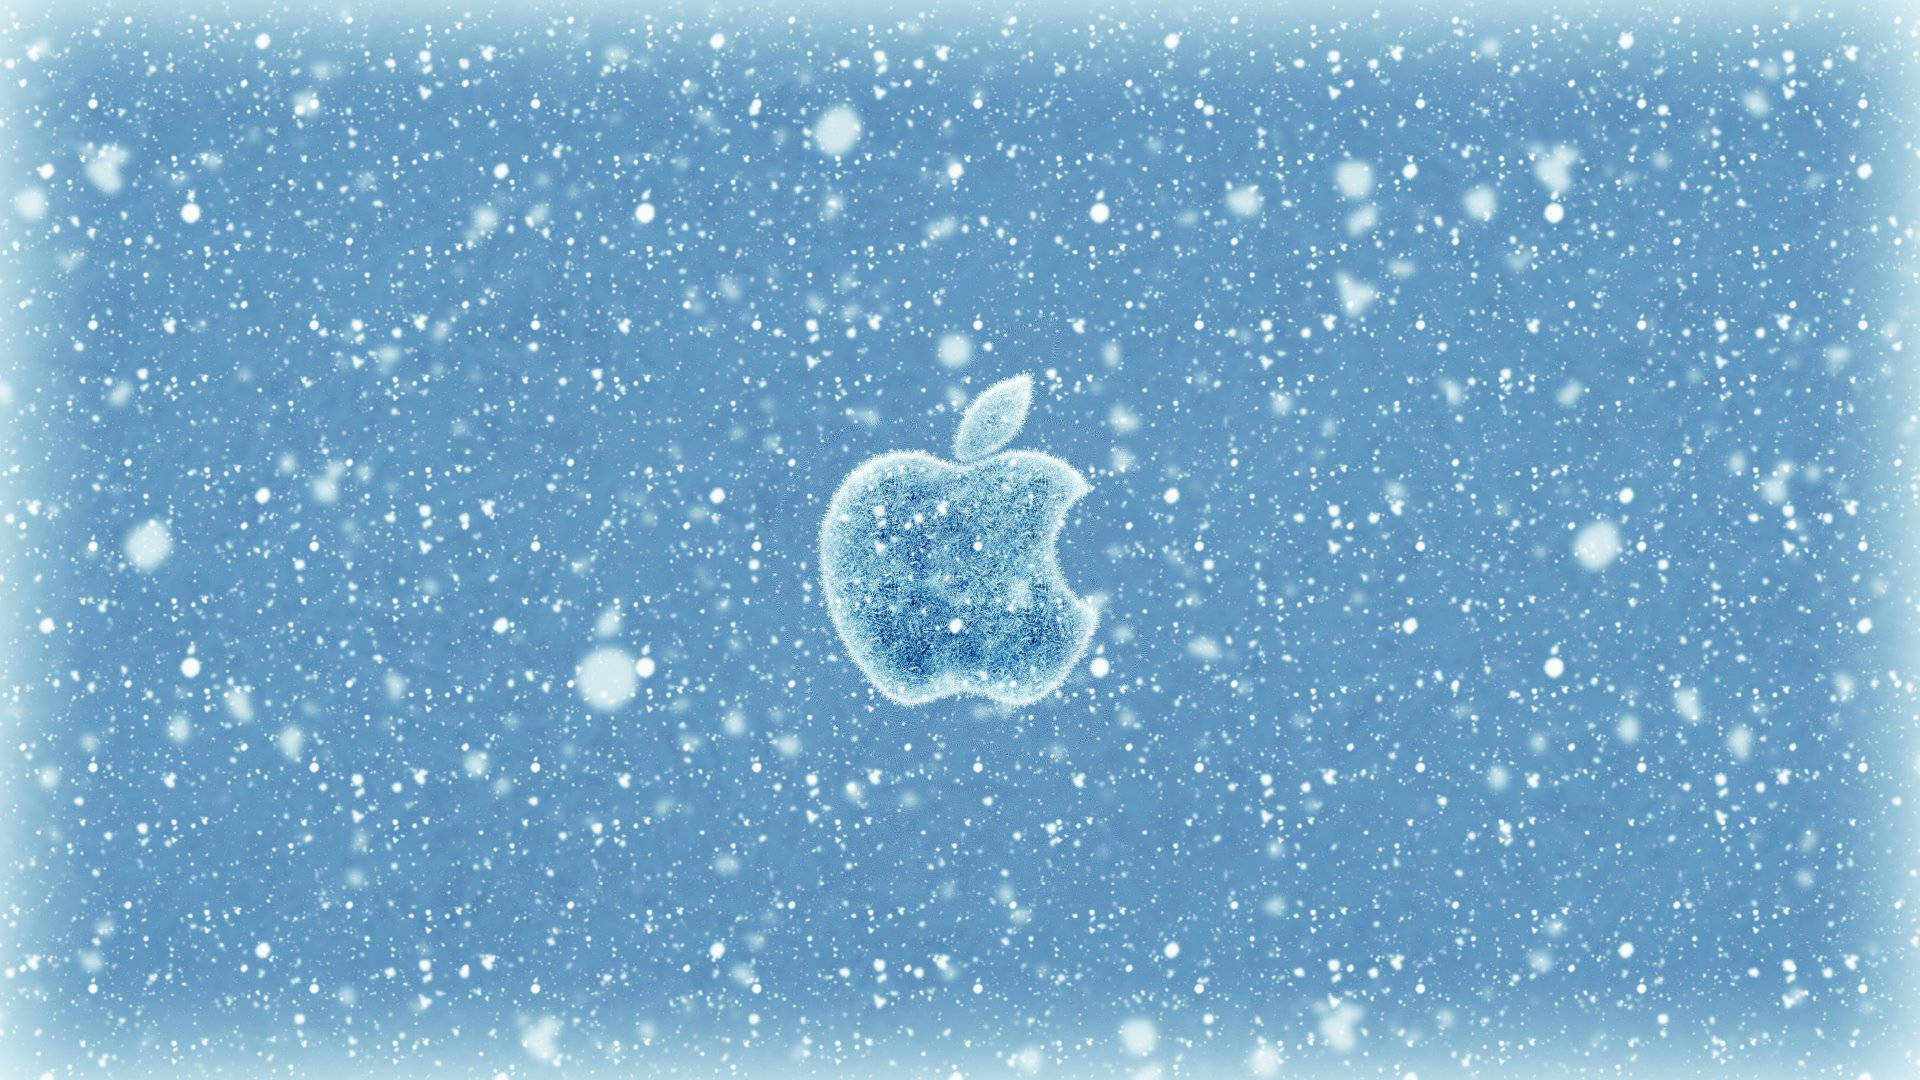 Apple Logo 1920X1080 Wallpaper and Background Image